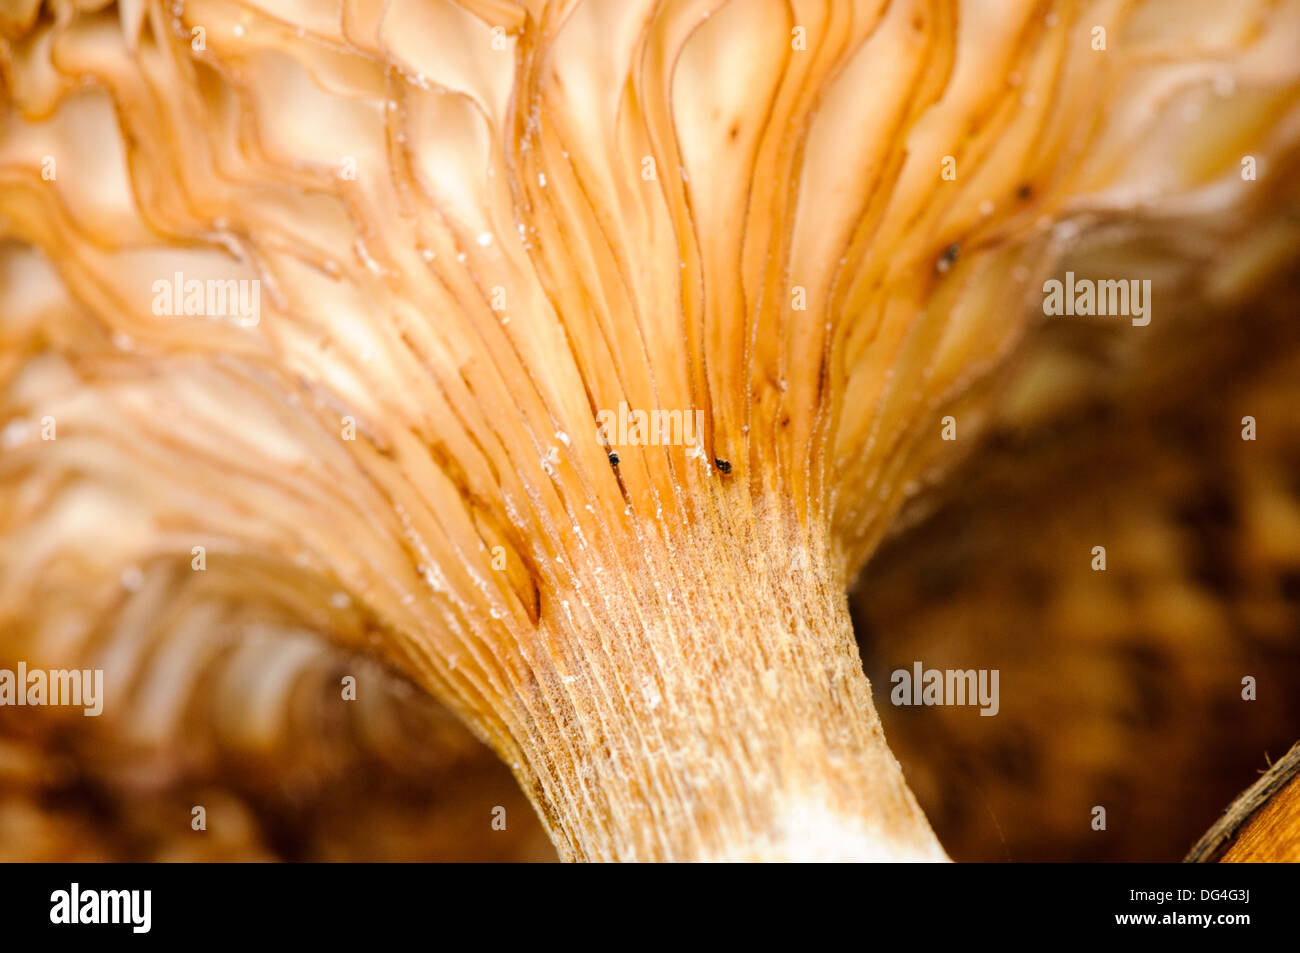 Veins underneath the cap and down the stipe of a Buttercap mushroom (Rhodocollybia butyracea) Stock Photo